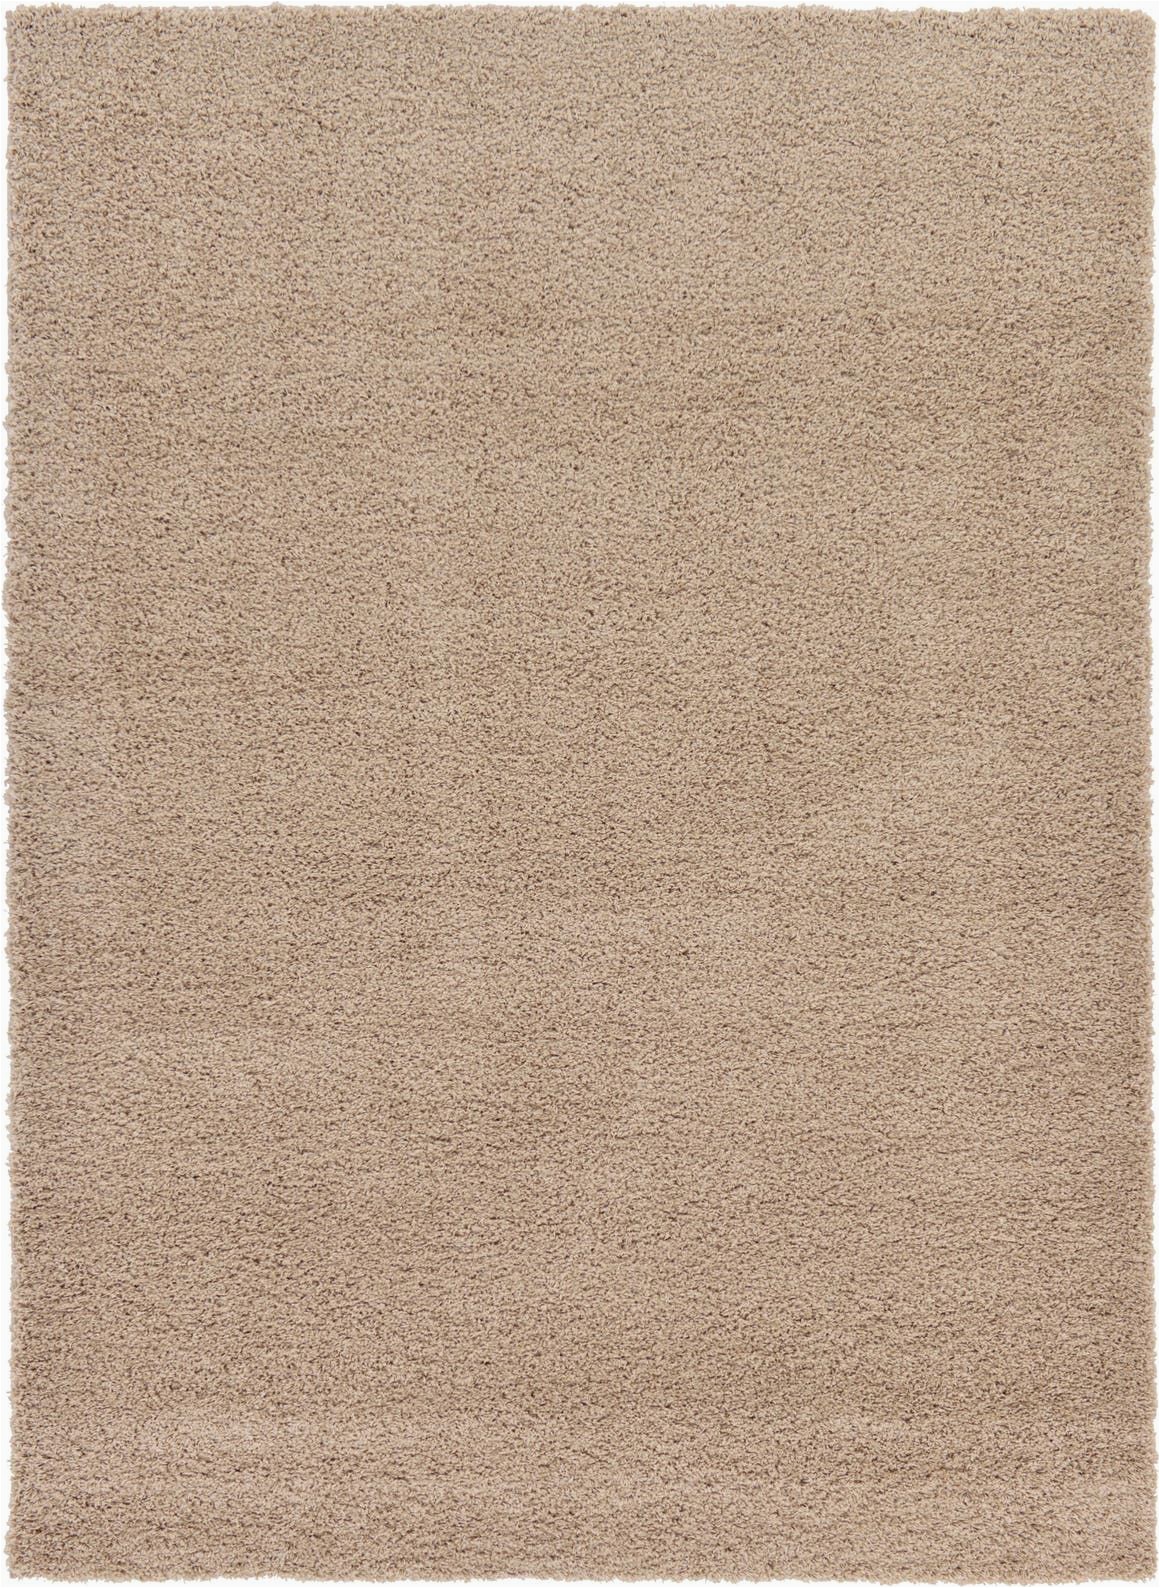 7 X 9 area Rugs Menards Taupe solid Shag area Rug In 2020